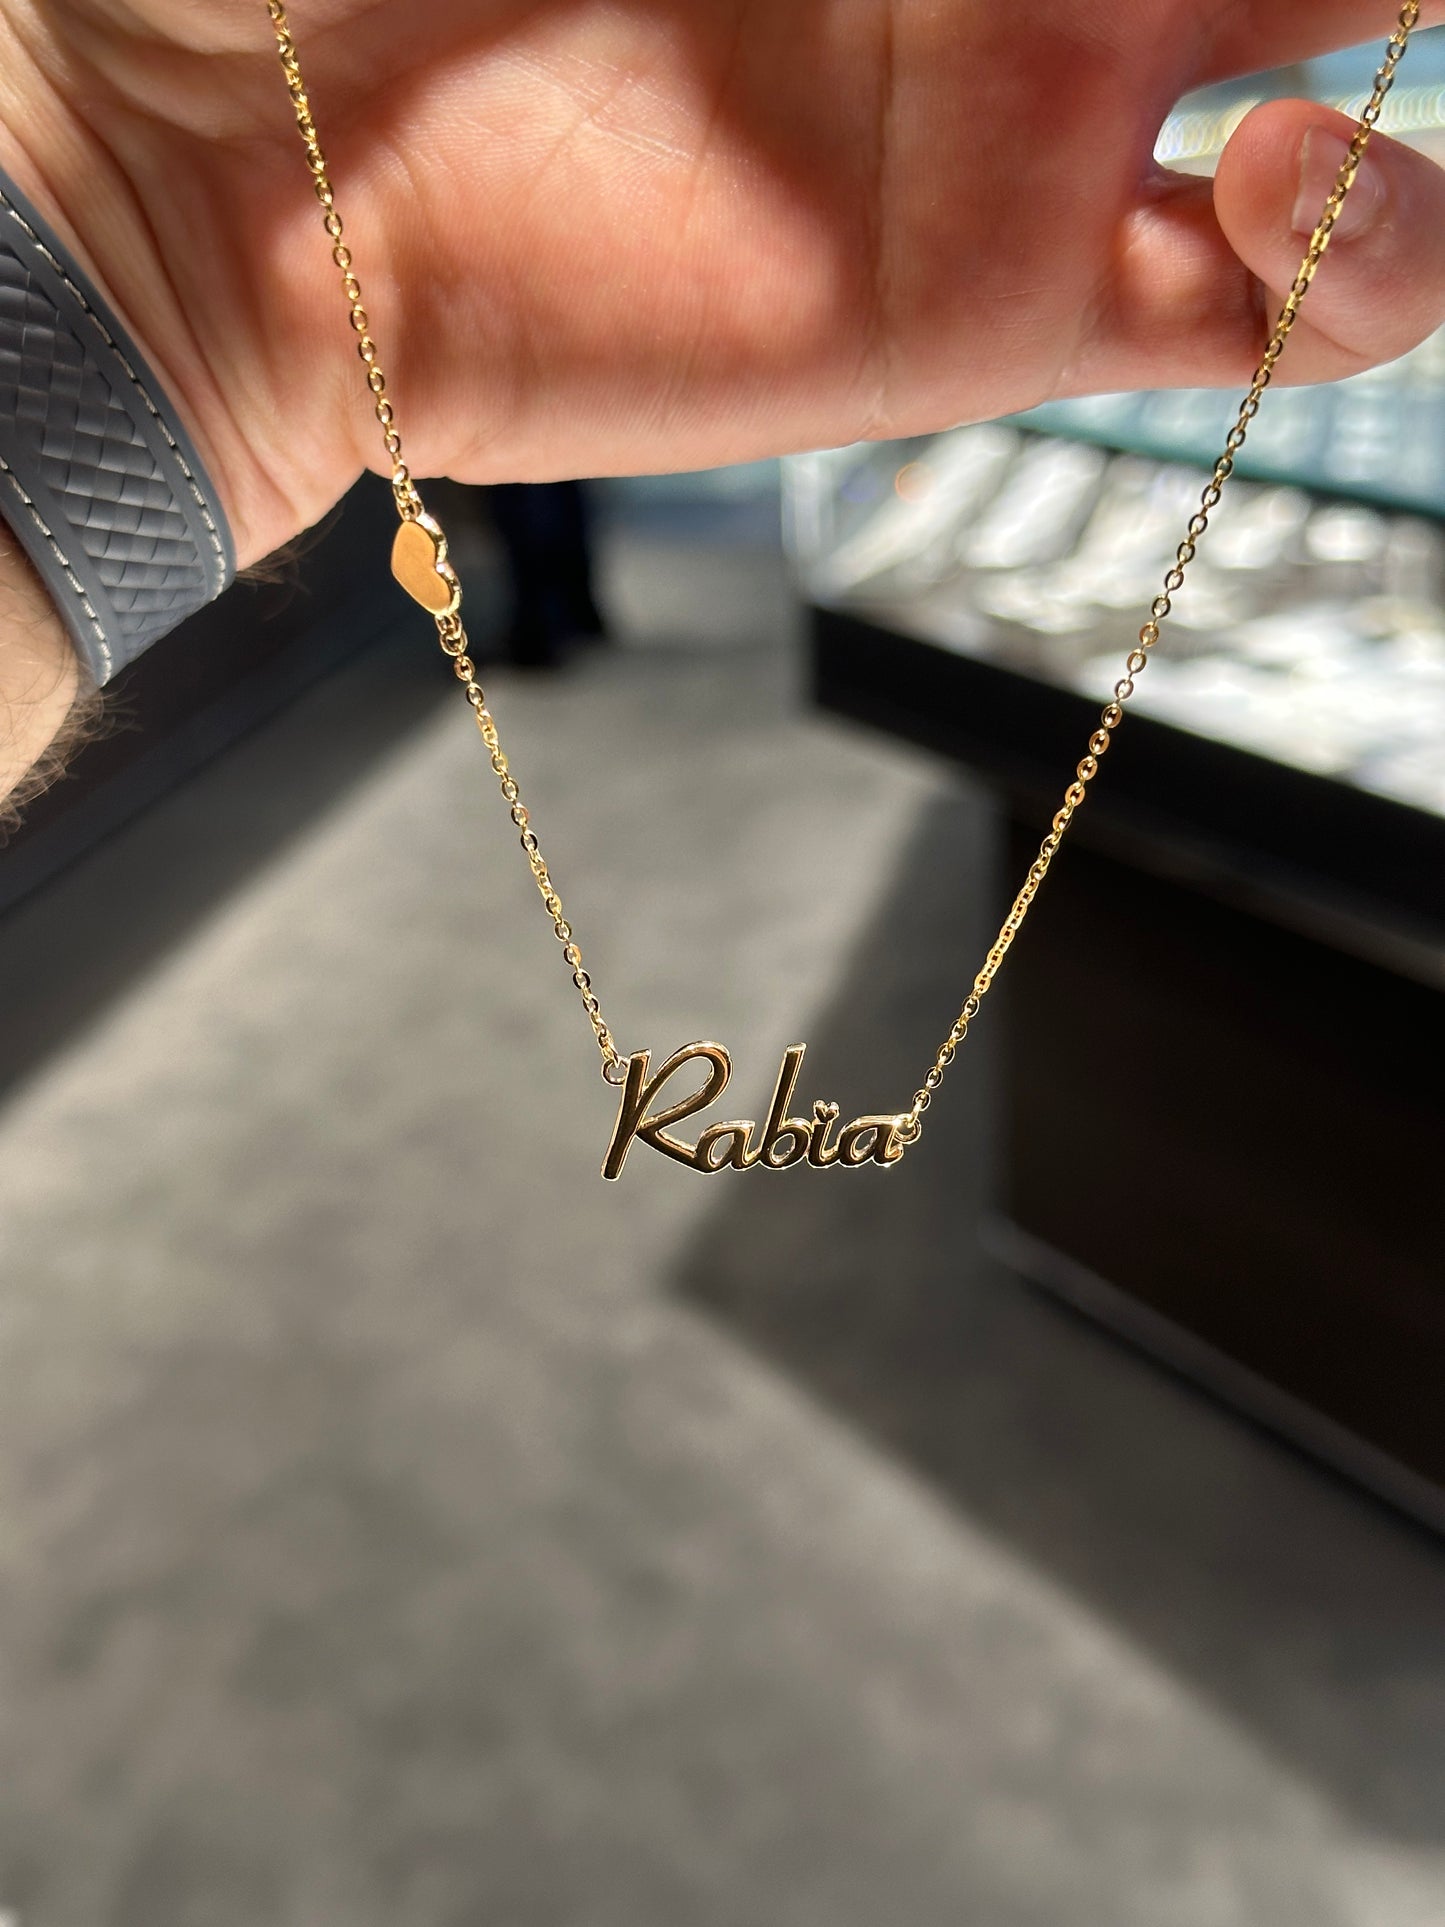 personalized Name Necklace